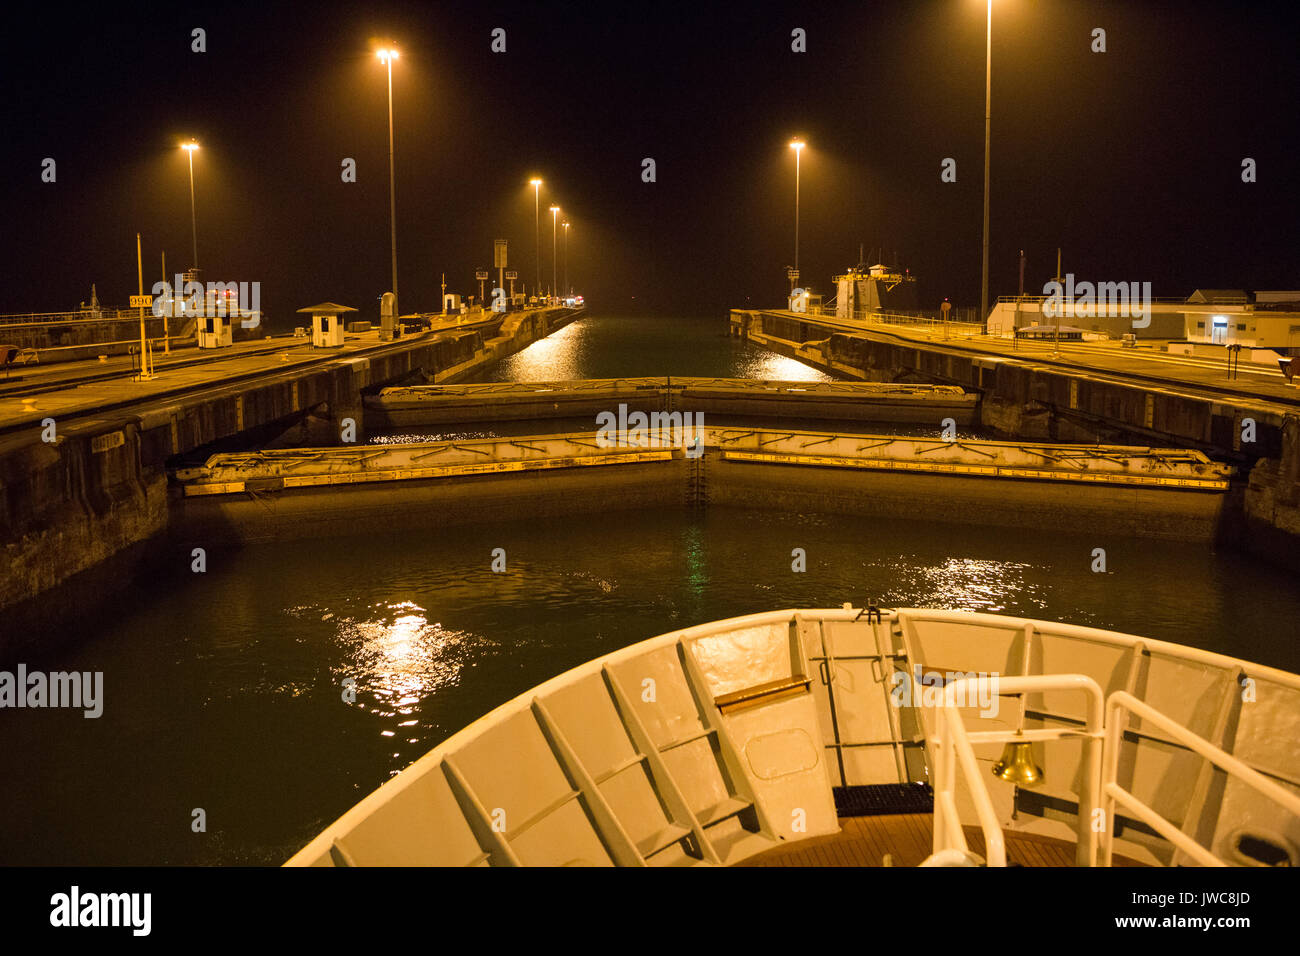 A view to the Gatun Locks of the Panama Canal from the bridge of an expedition cruise ship,the National Geographic Sea Lion. Stock Photo